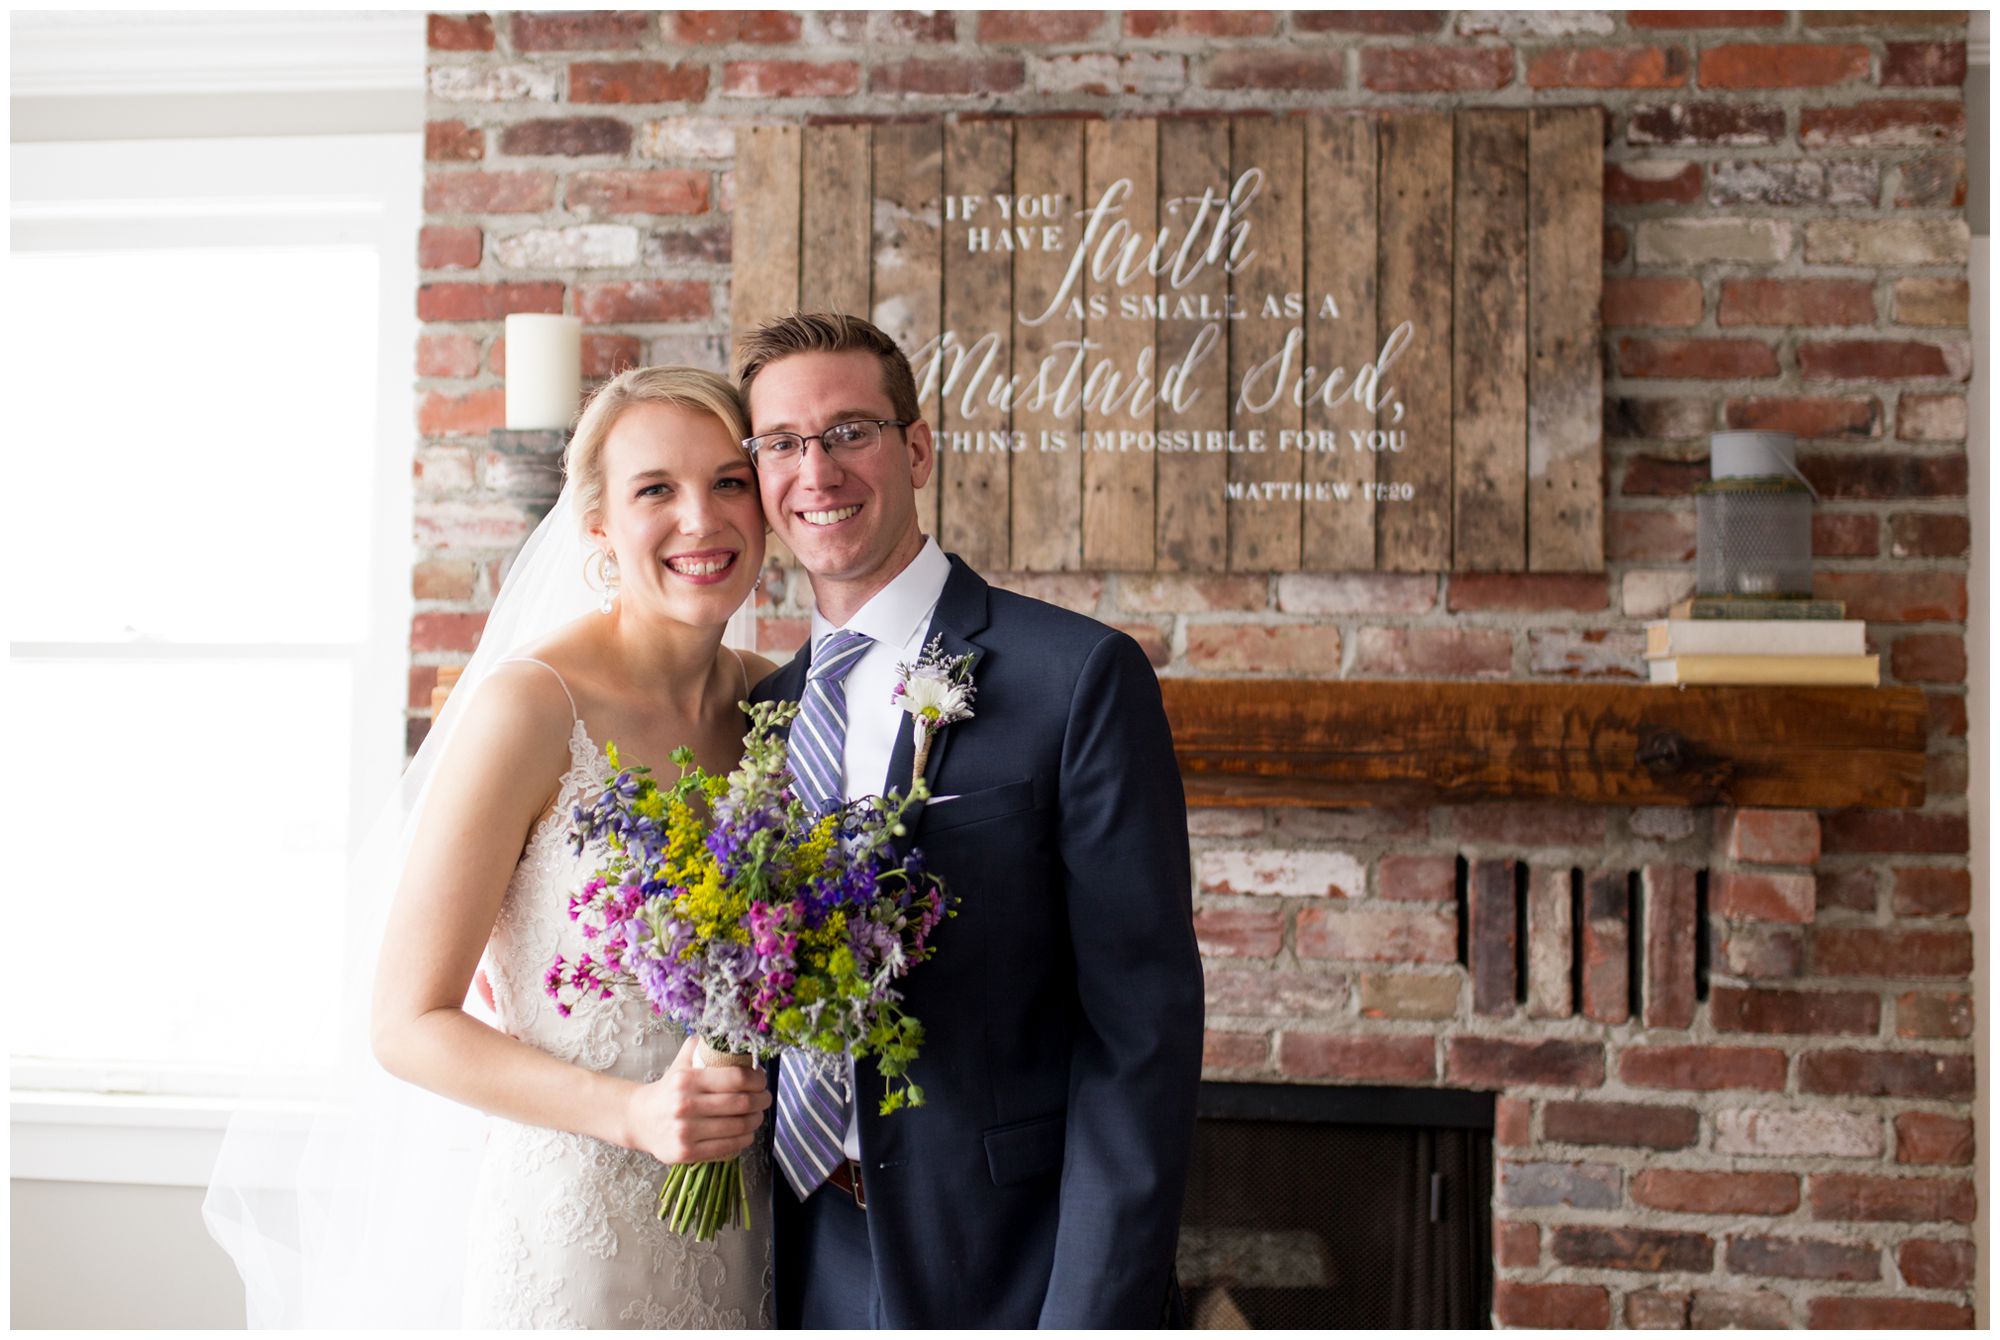 Metsker House bride and groom portraits at Mustard Seed Gardens wedding in Noblesville Indiana